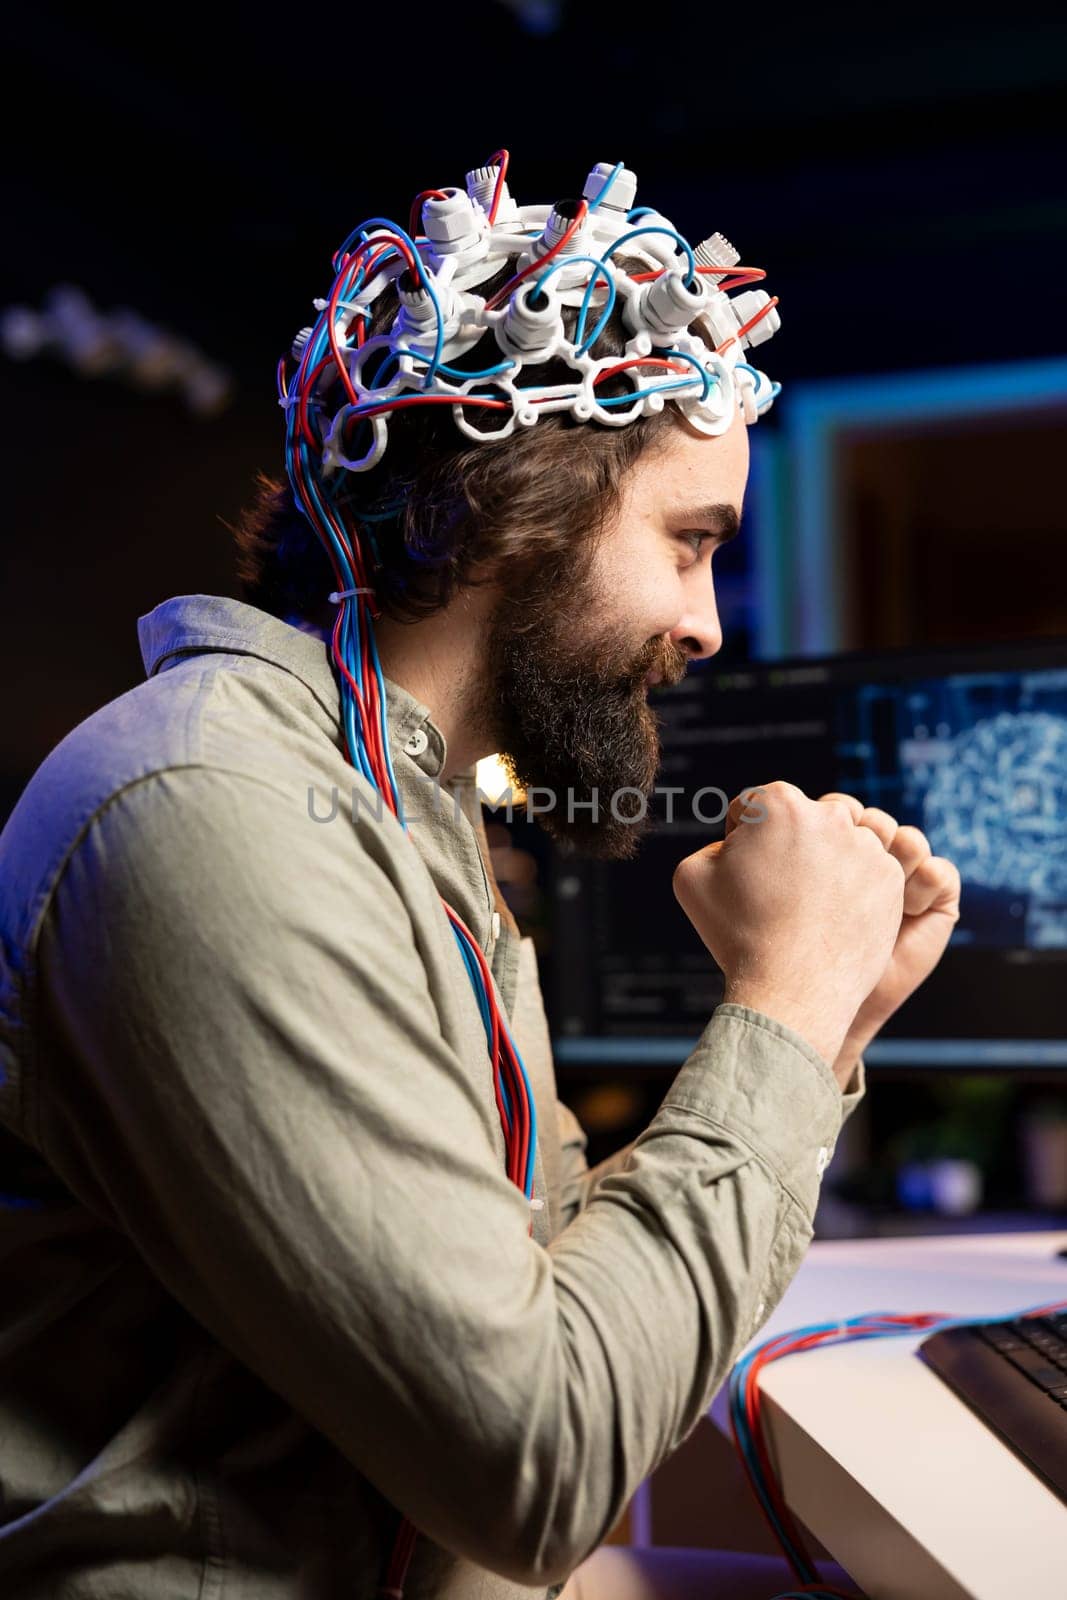 Cheerful transhumanist celebrates after gaining superintelligence using tech by DCStudio